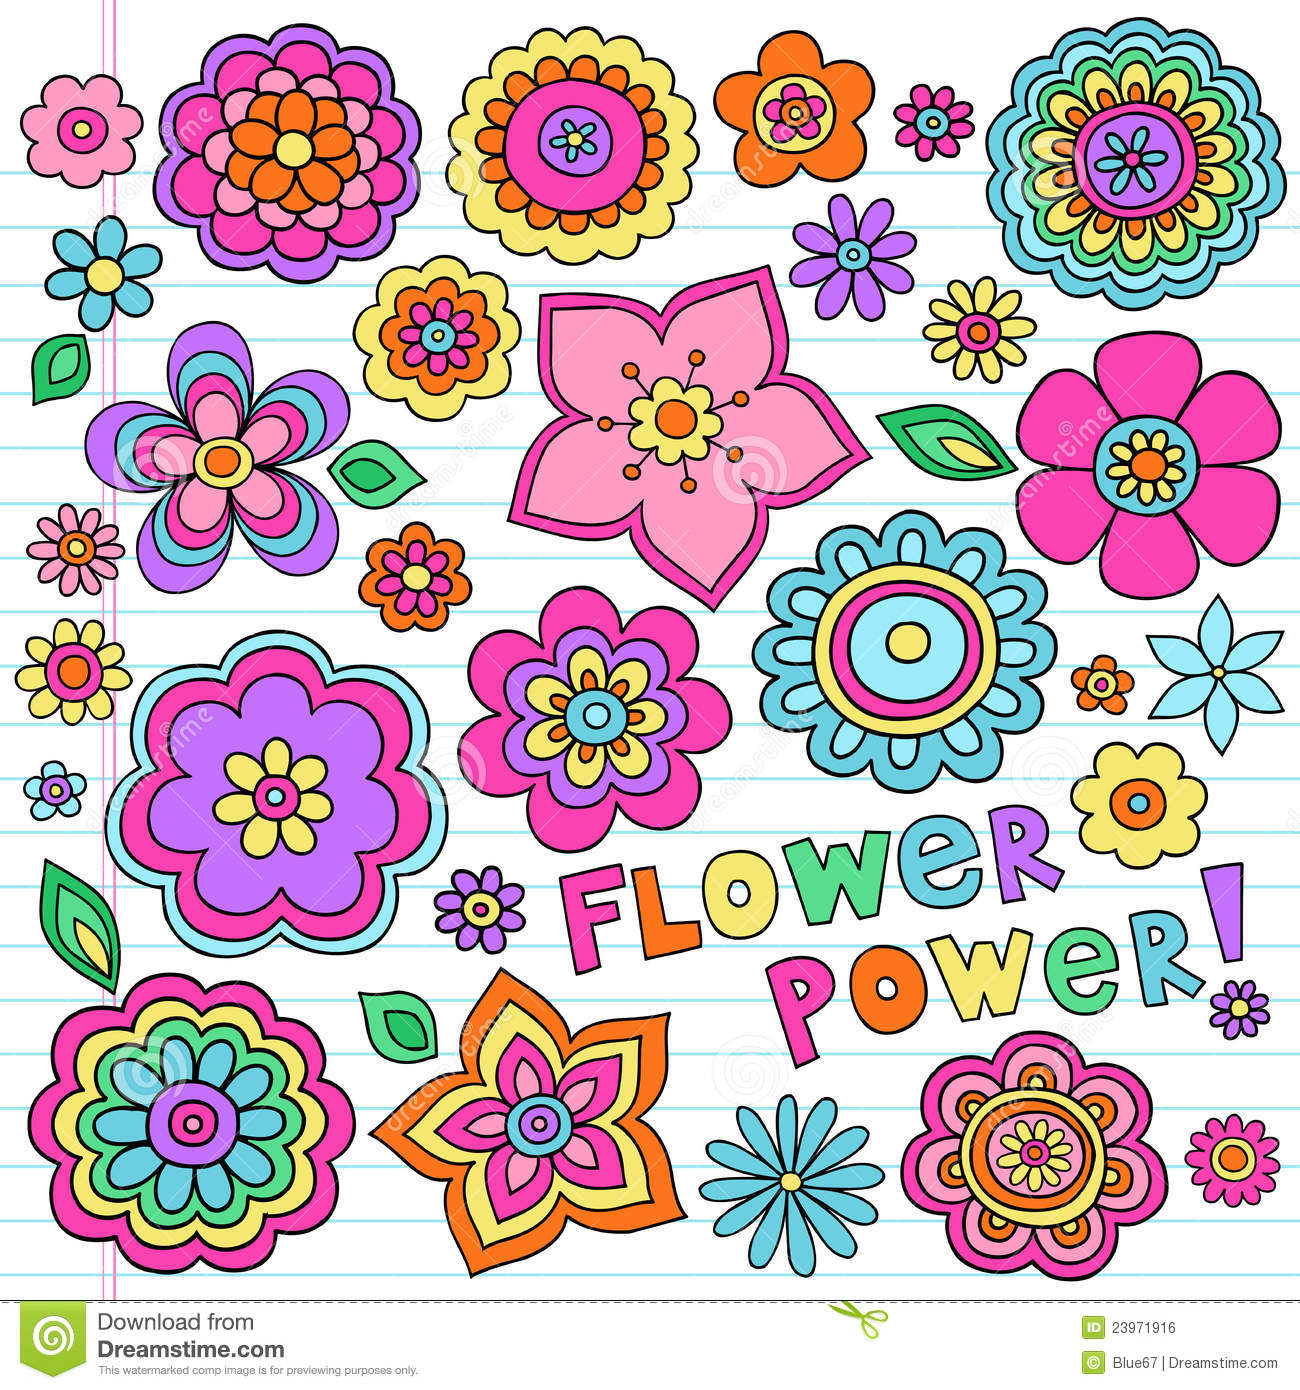 Psychedelic Flower Power Doodles Vector Set Royalty Free Stock Image    